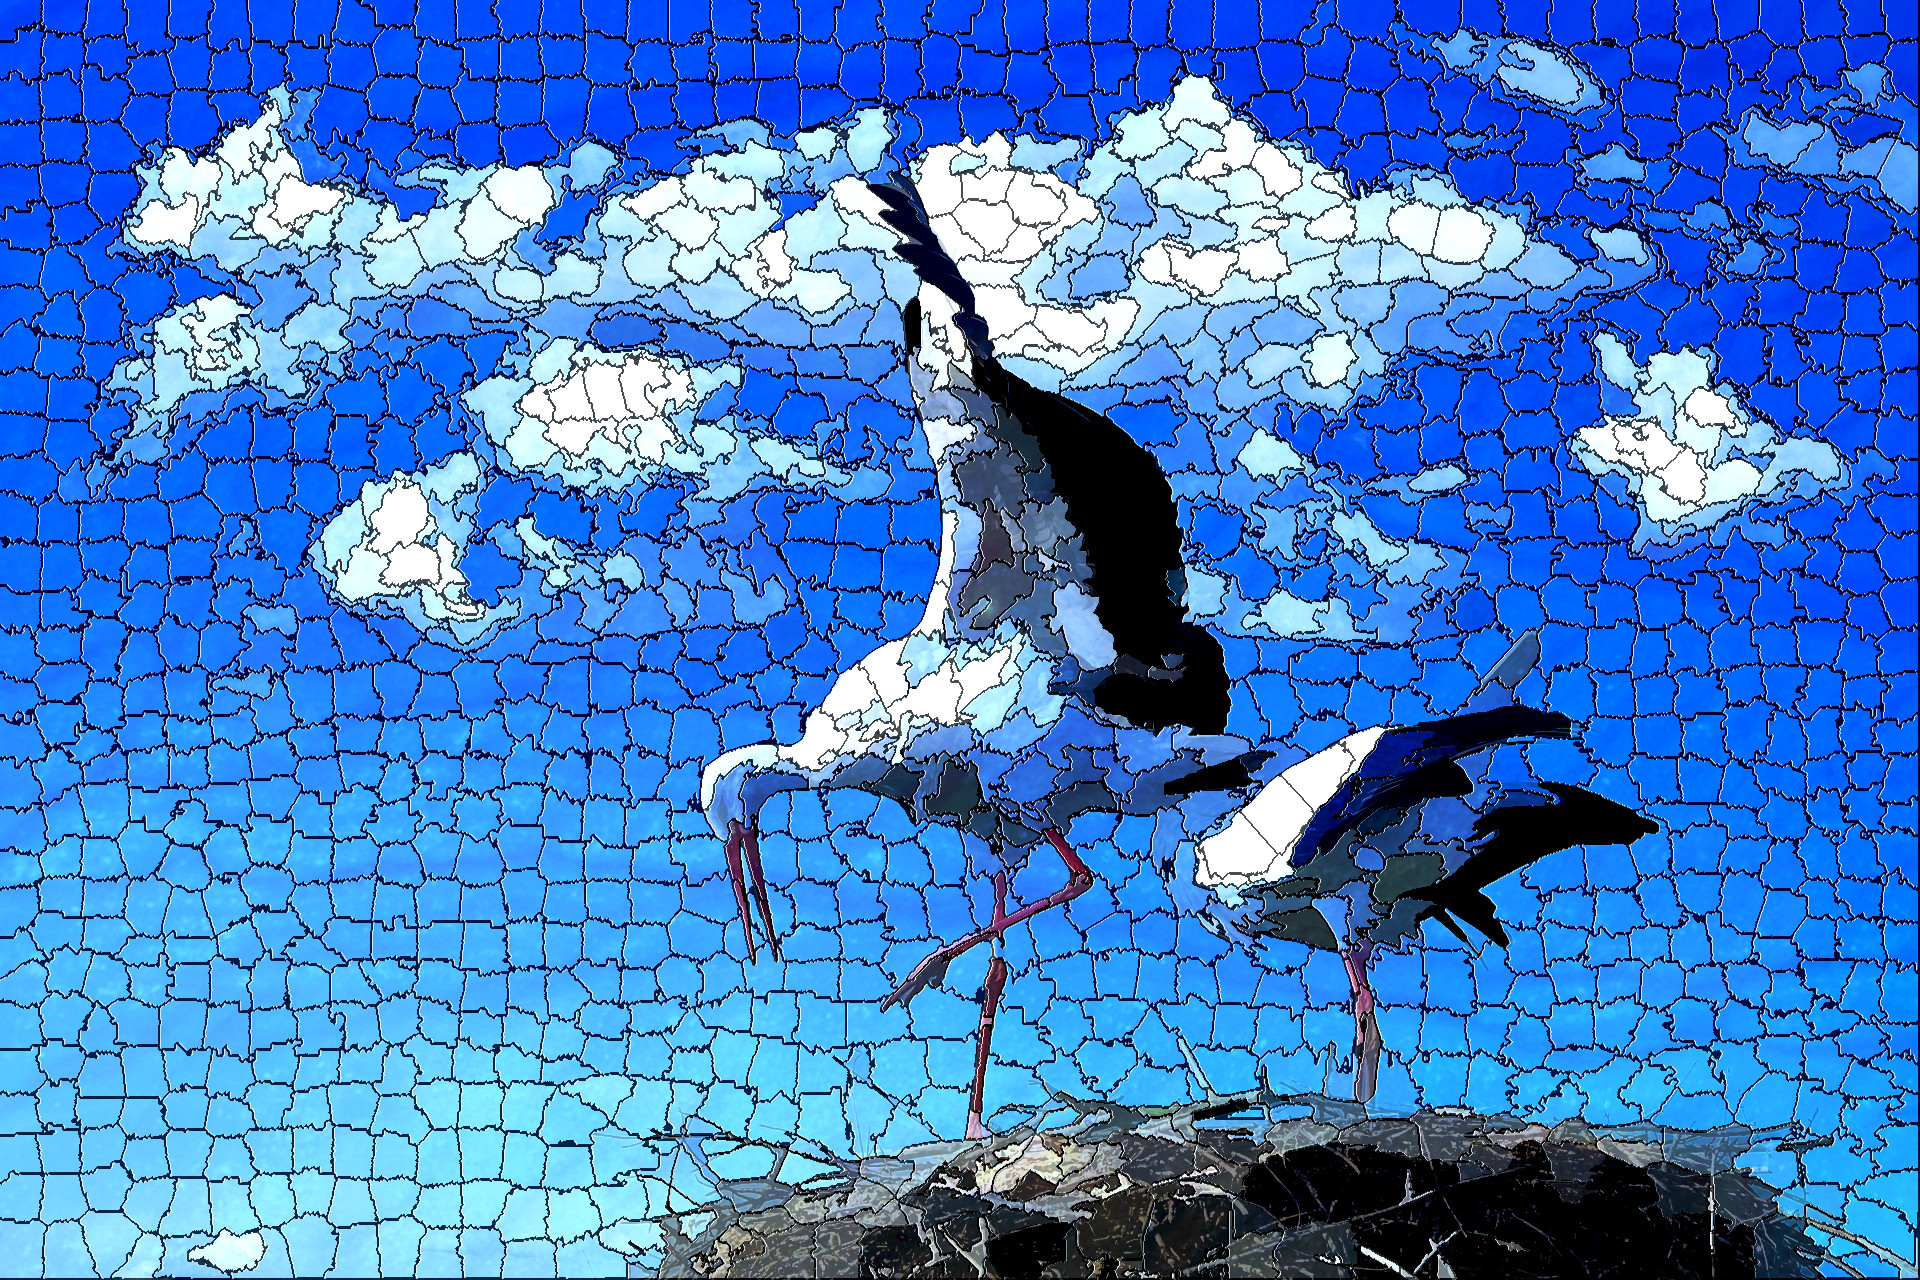 2023-09-02 17-41-51storks-838424_1920 with a simple mosaic effect.jpeg